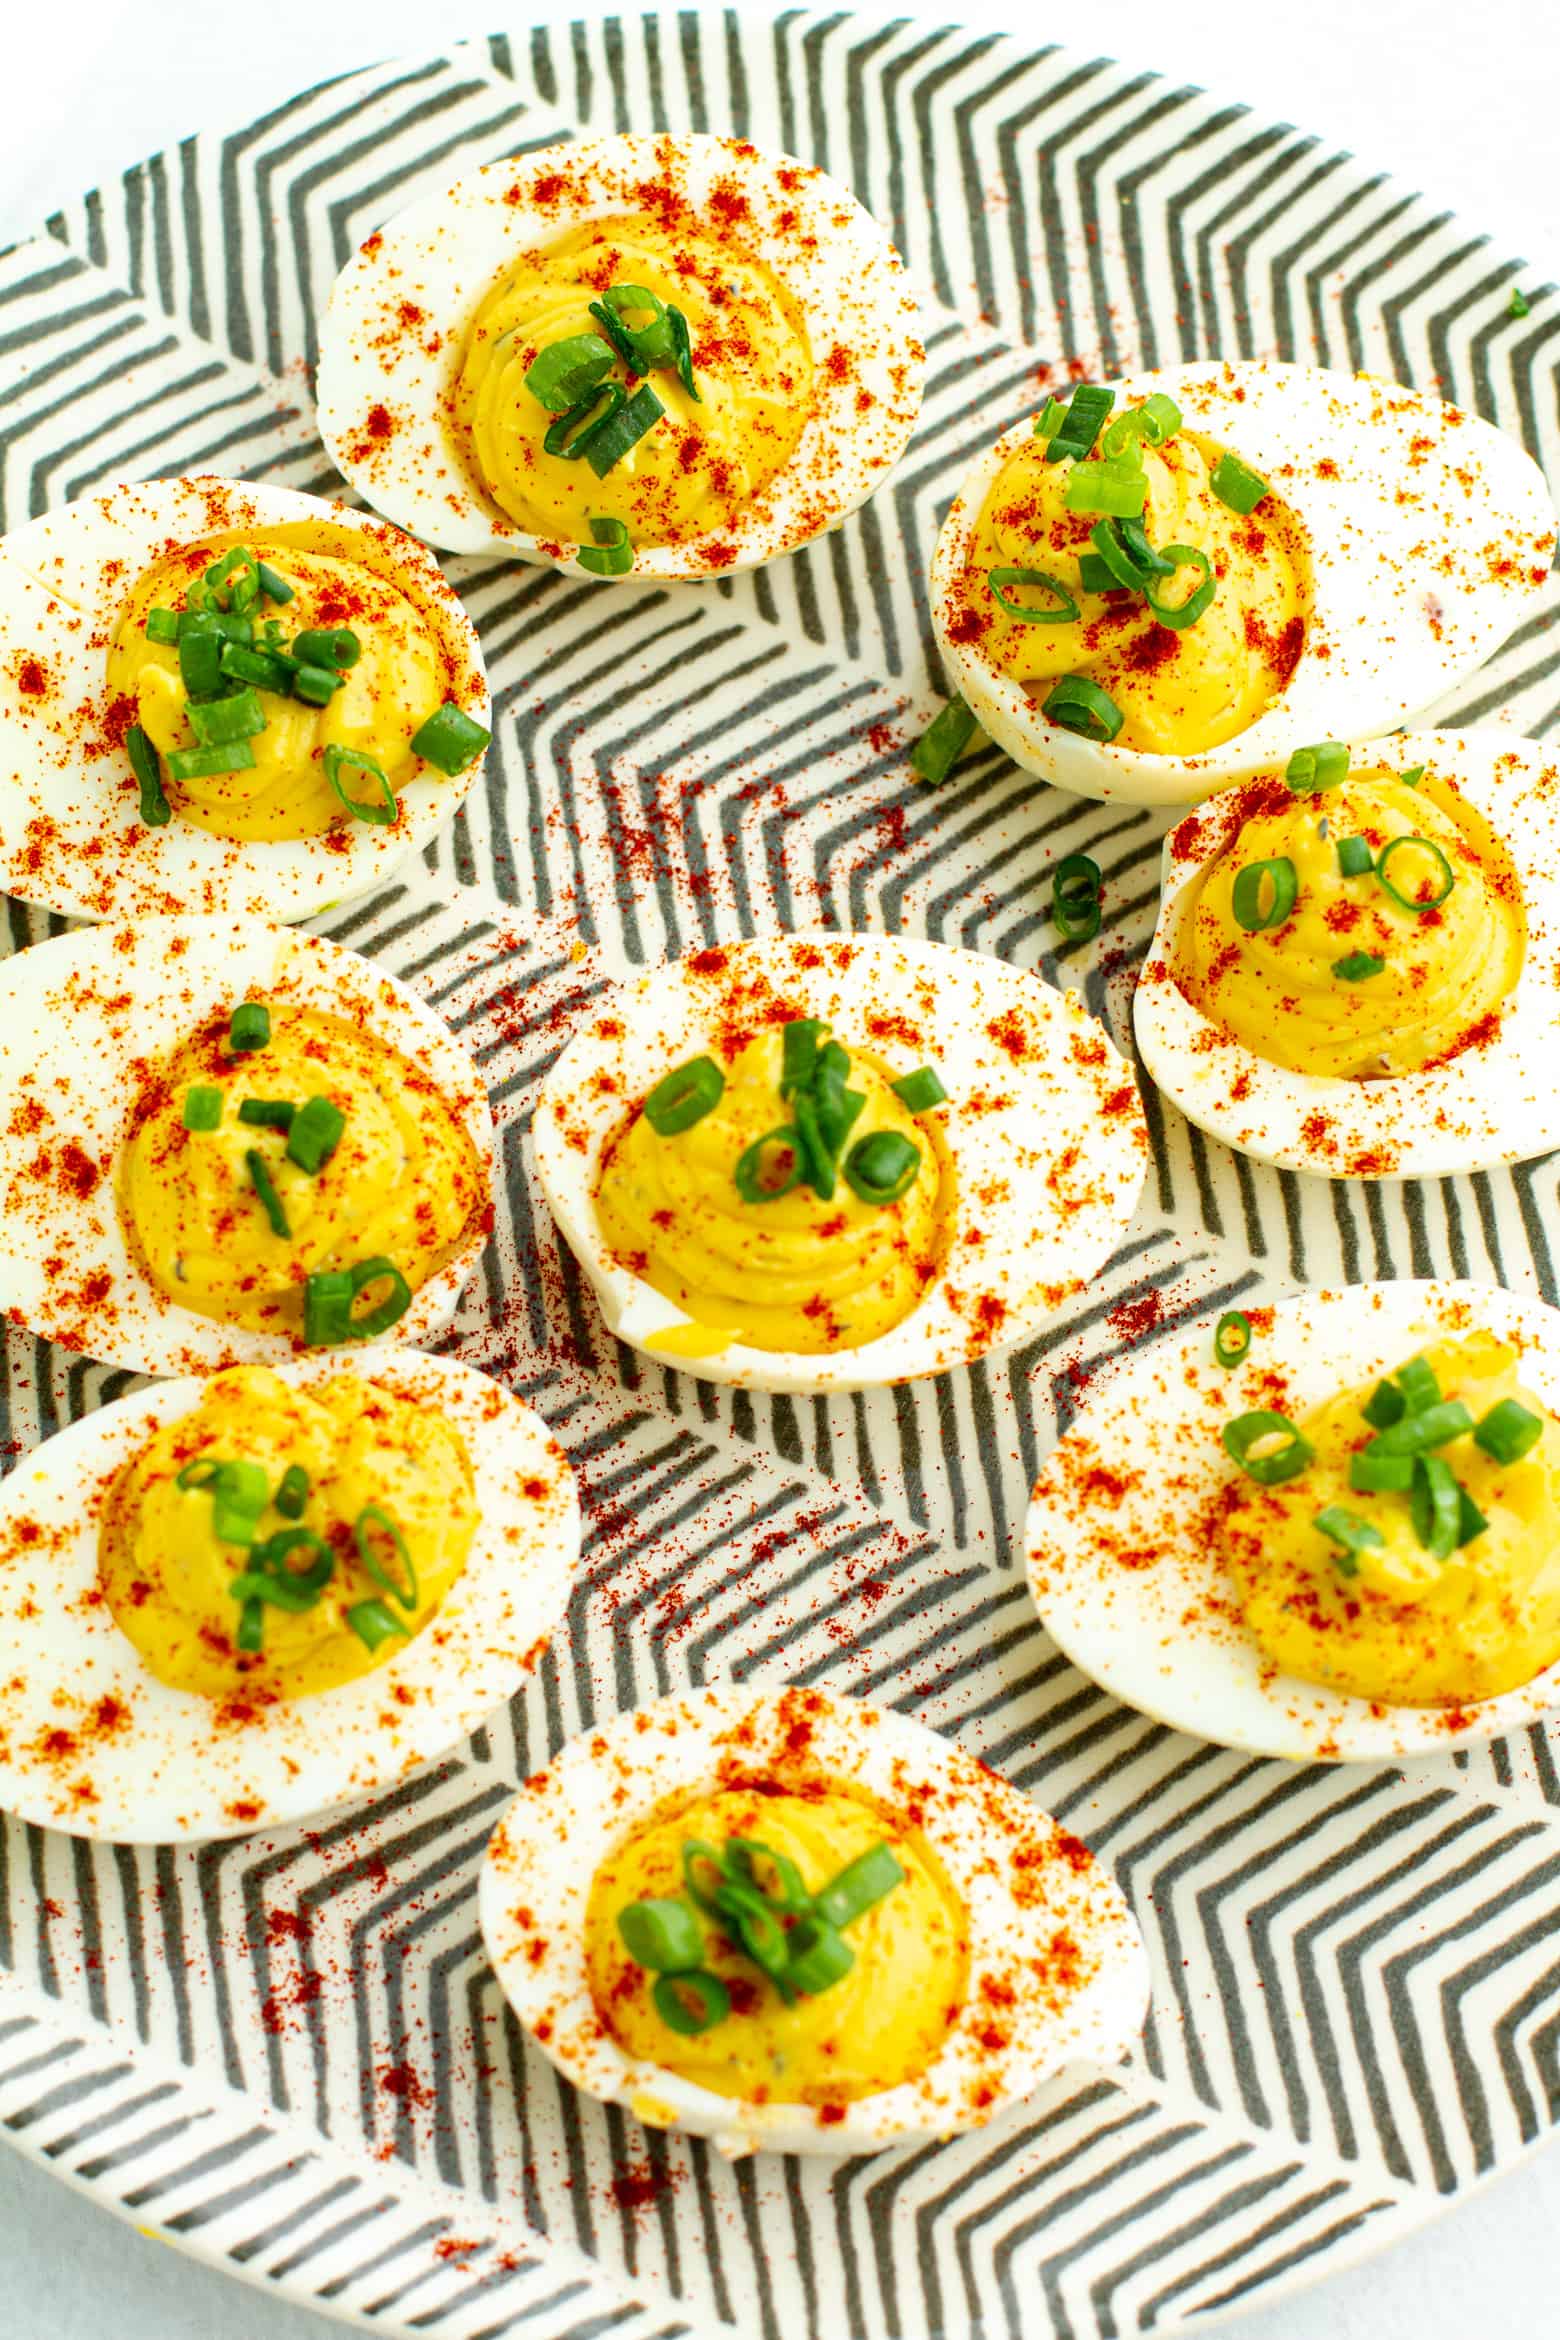 Southern Deviled Eggs on a plate.